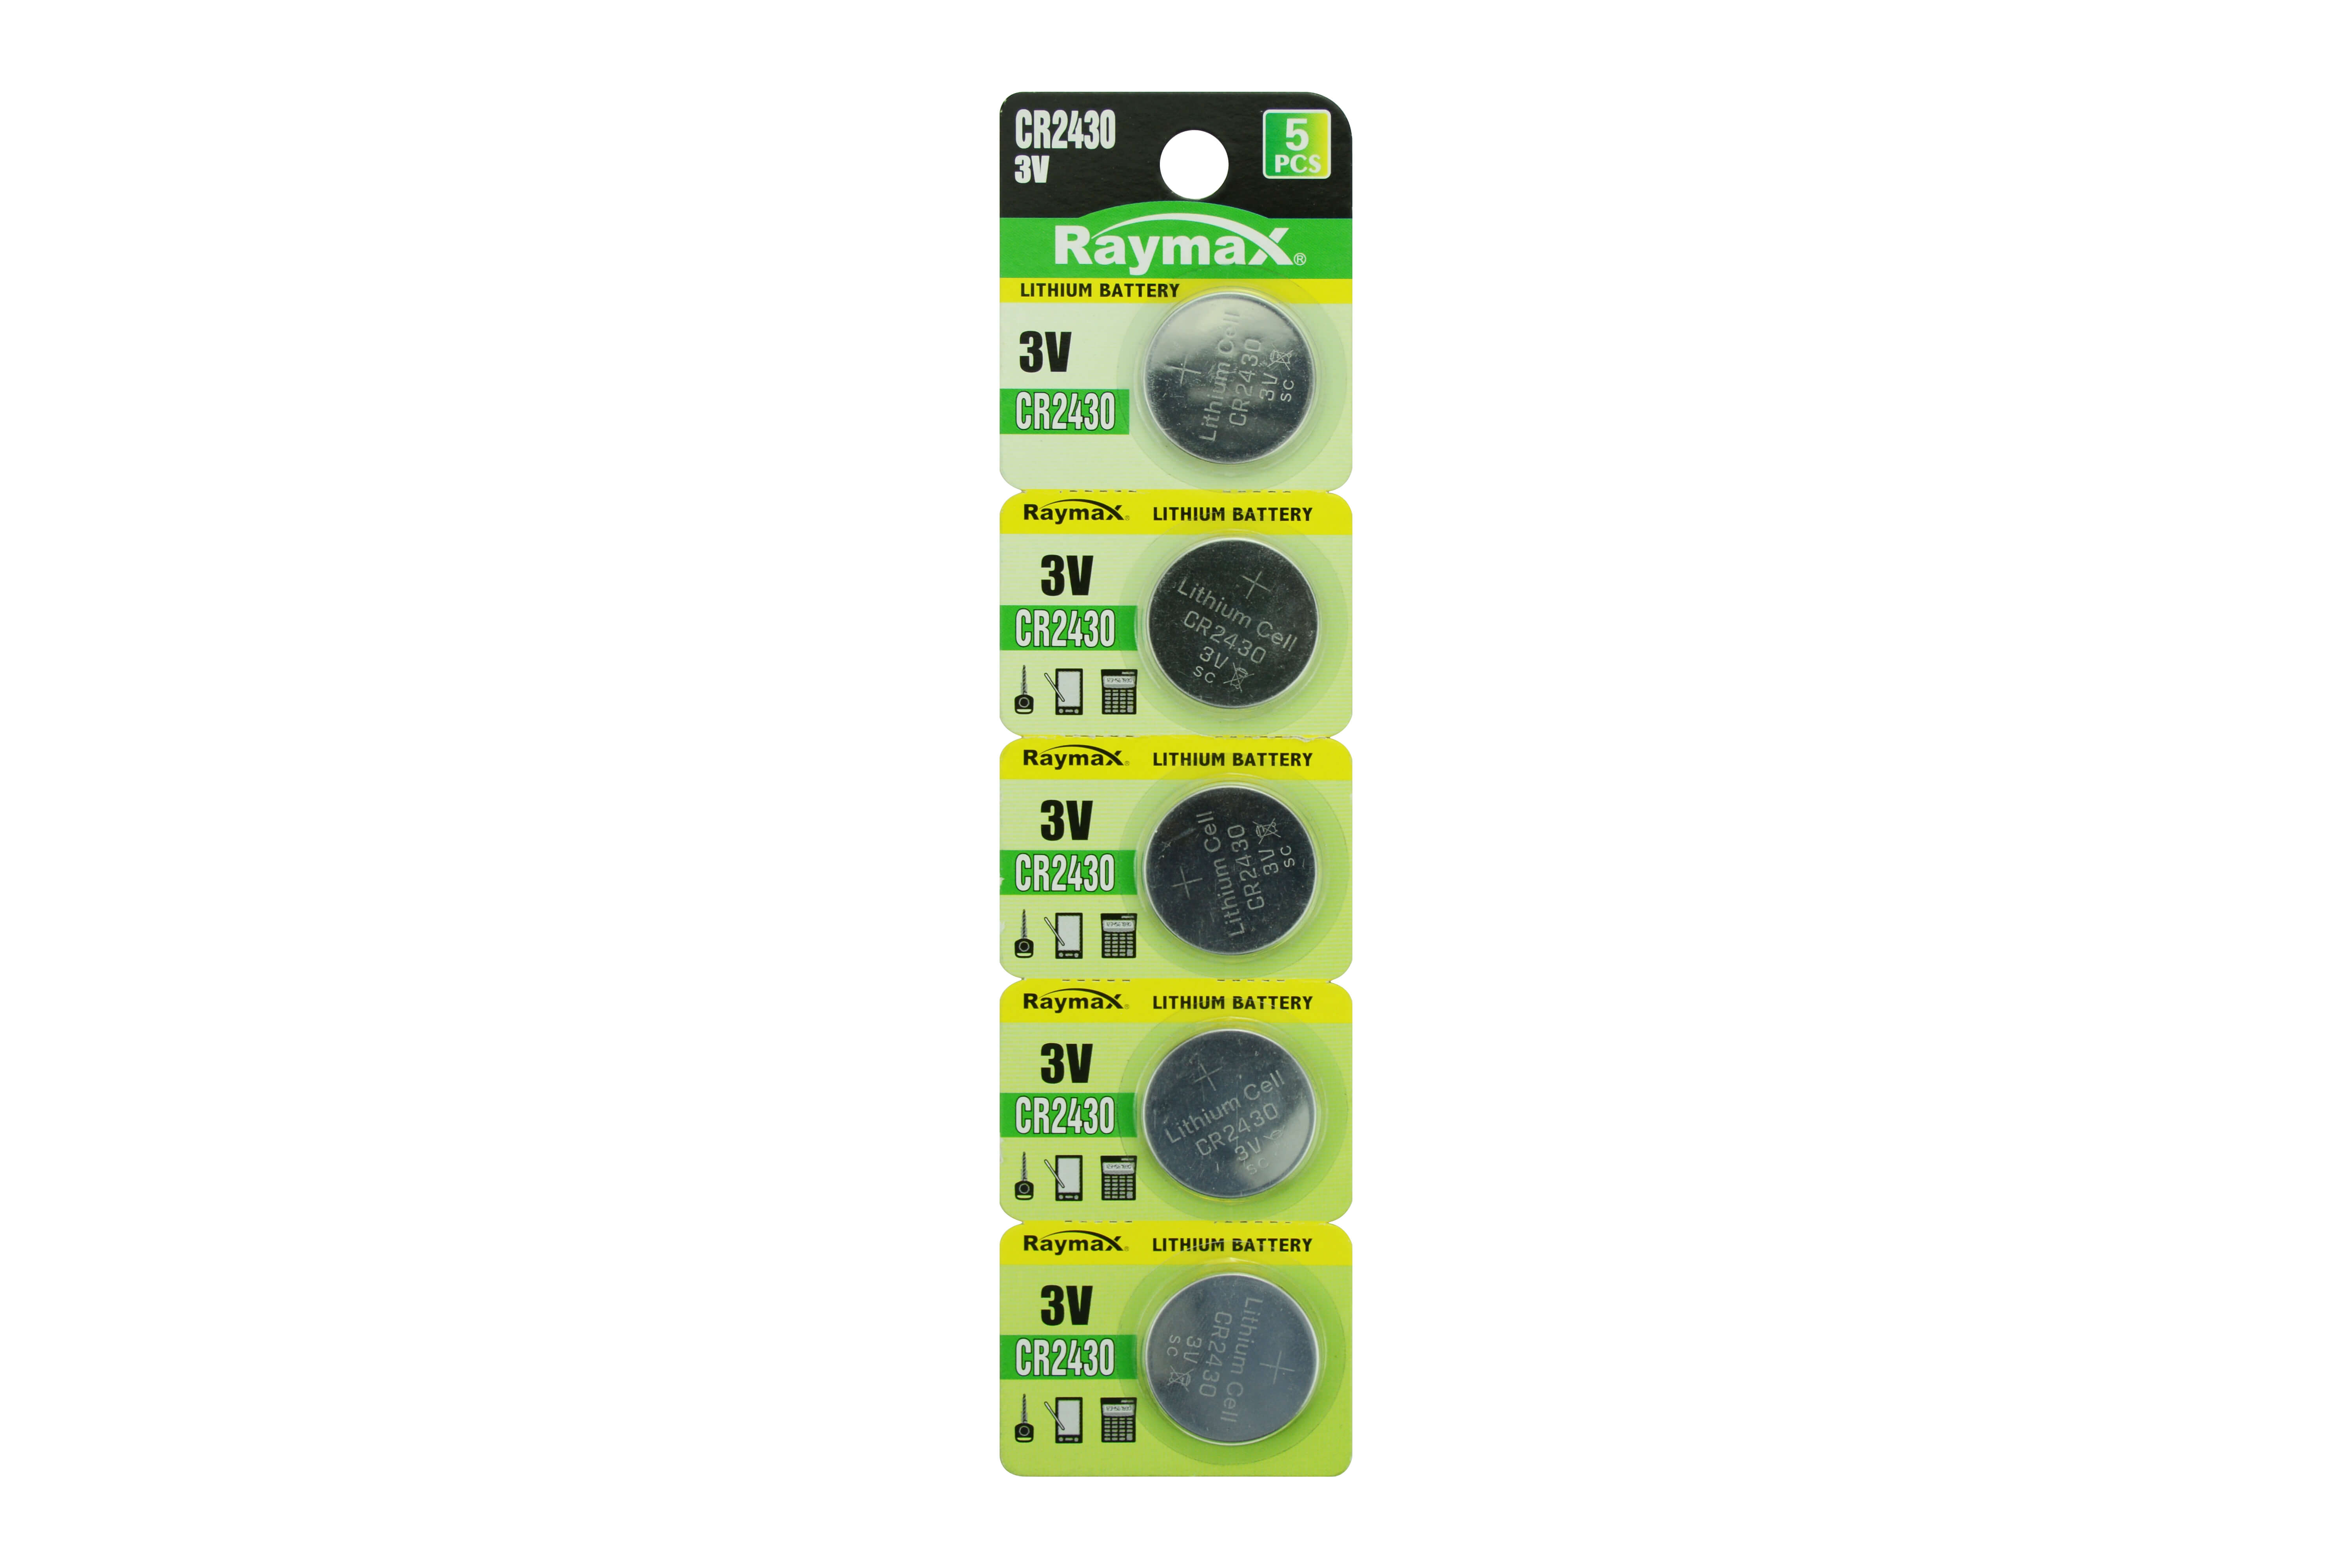 Raymax 3v lithium button battery CR2430 5-pack